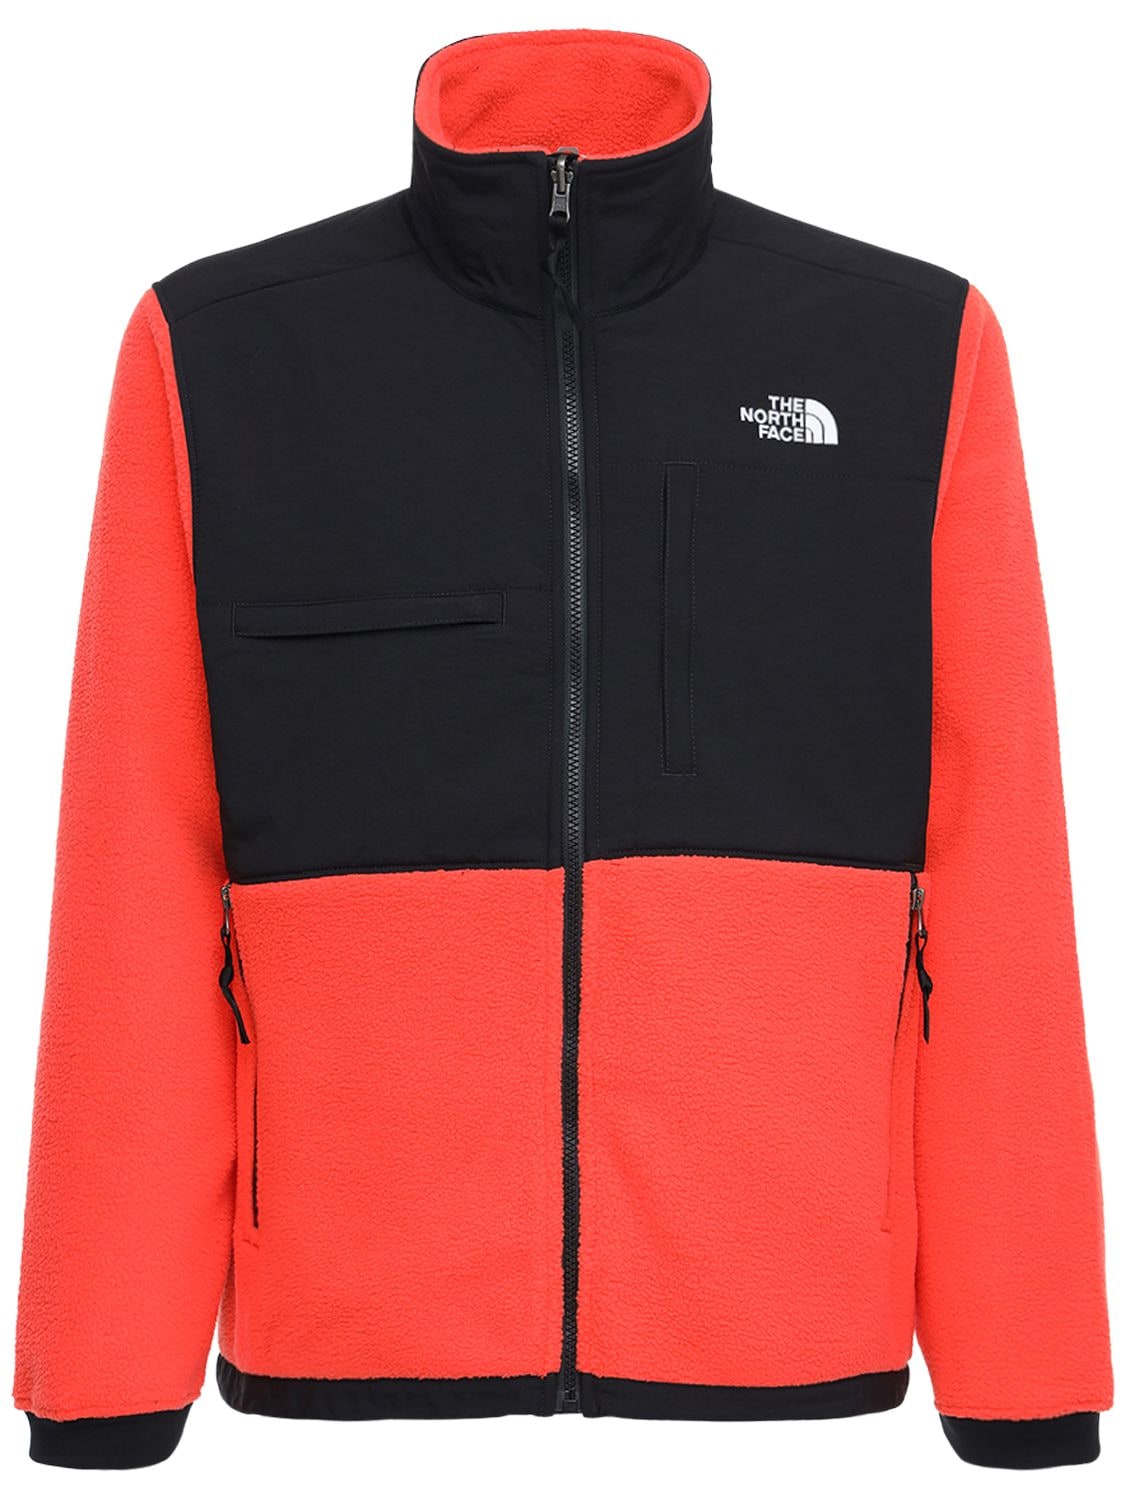 The North Face Denali 2 Jacket In Flare